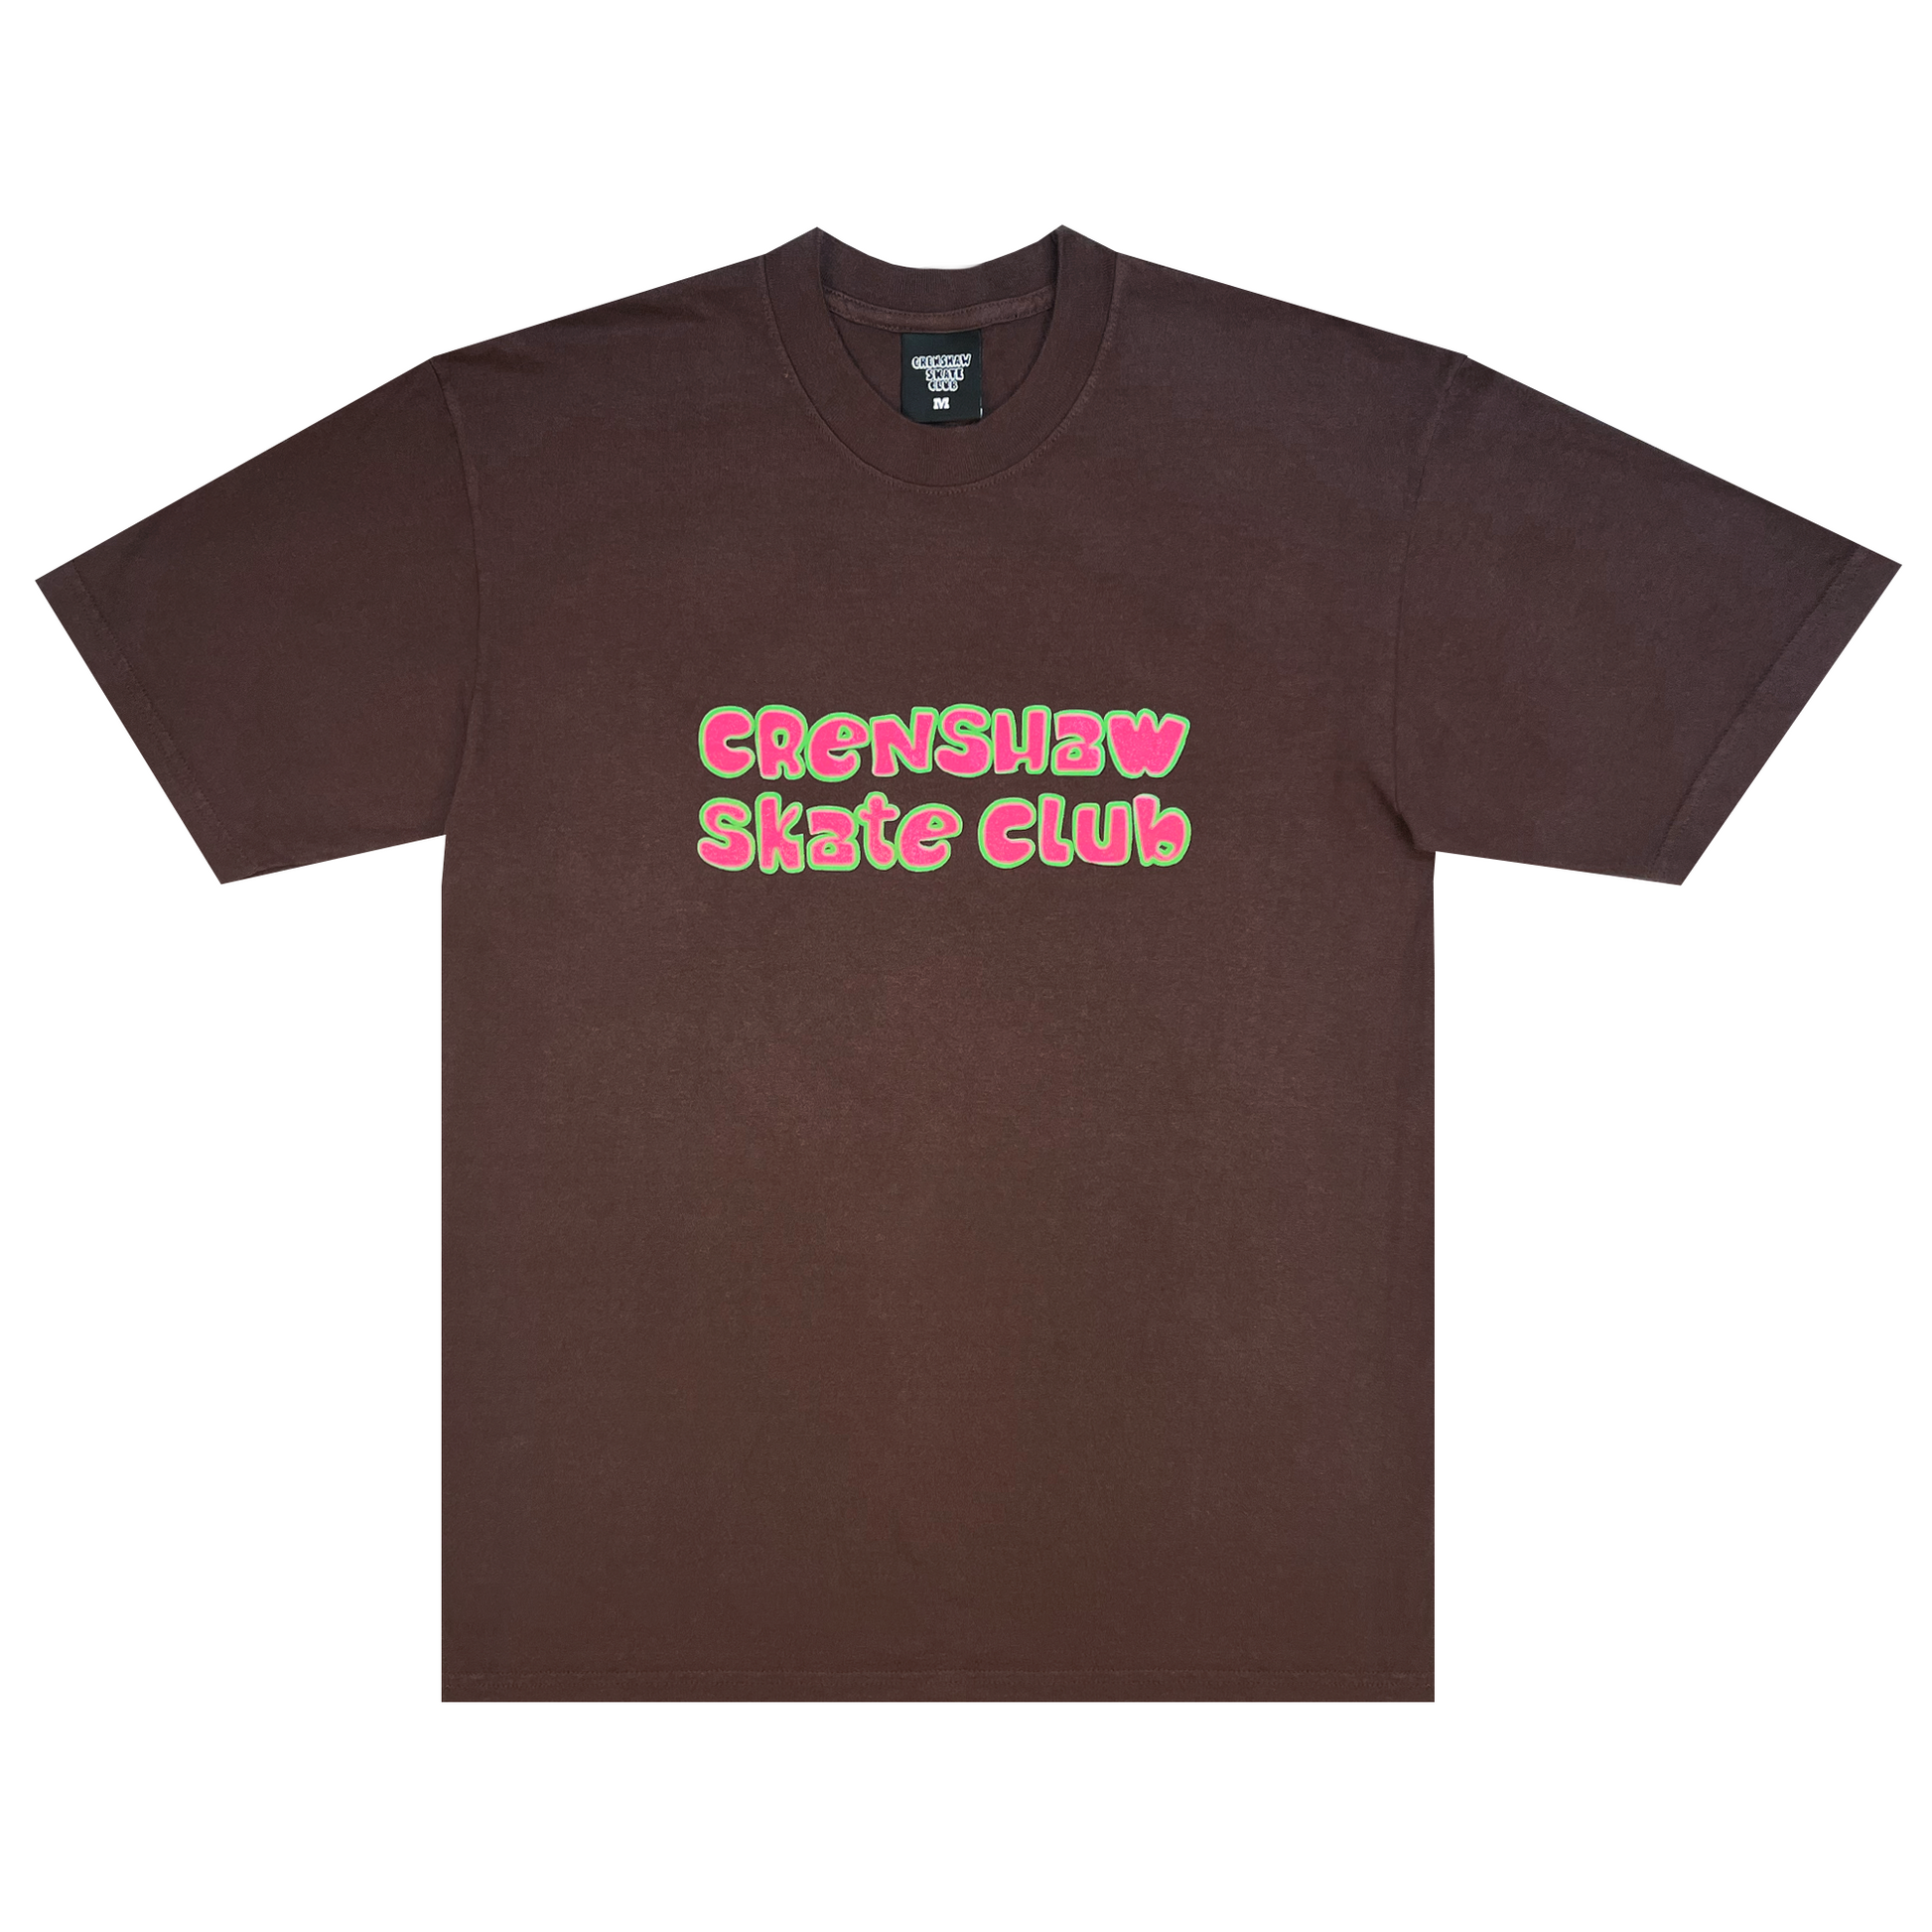 Lab Collection La Clippers Clippers x Crenshaw Skate Club T-Shirt